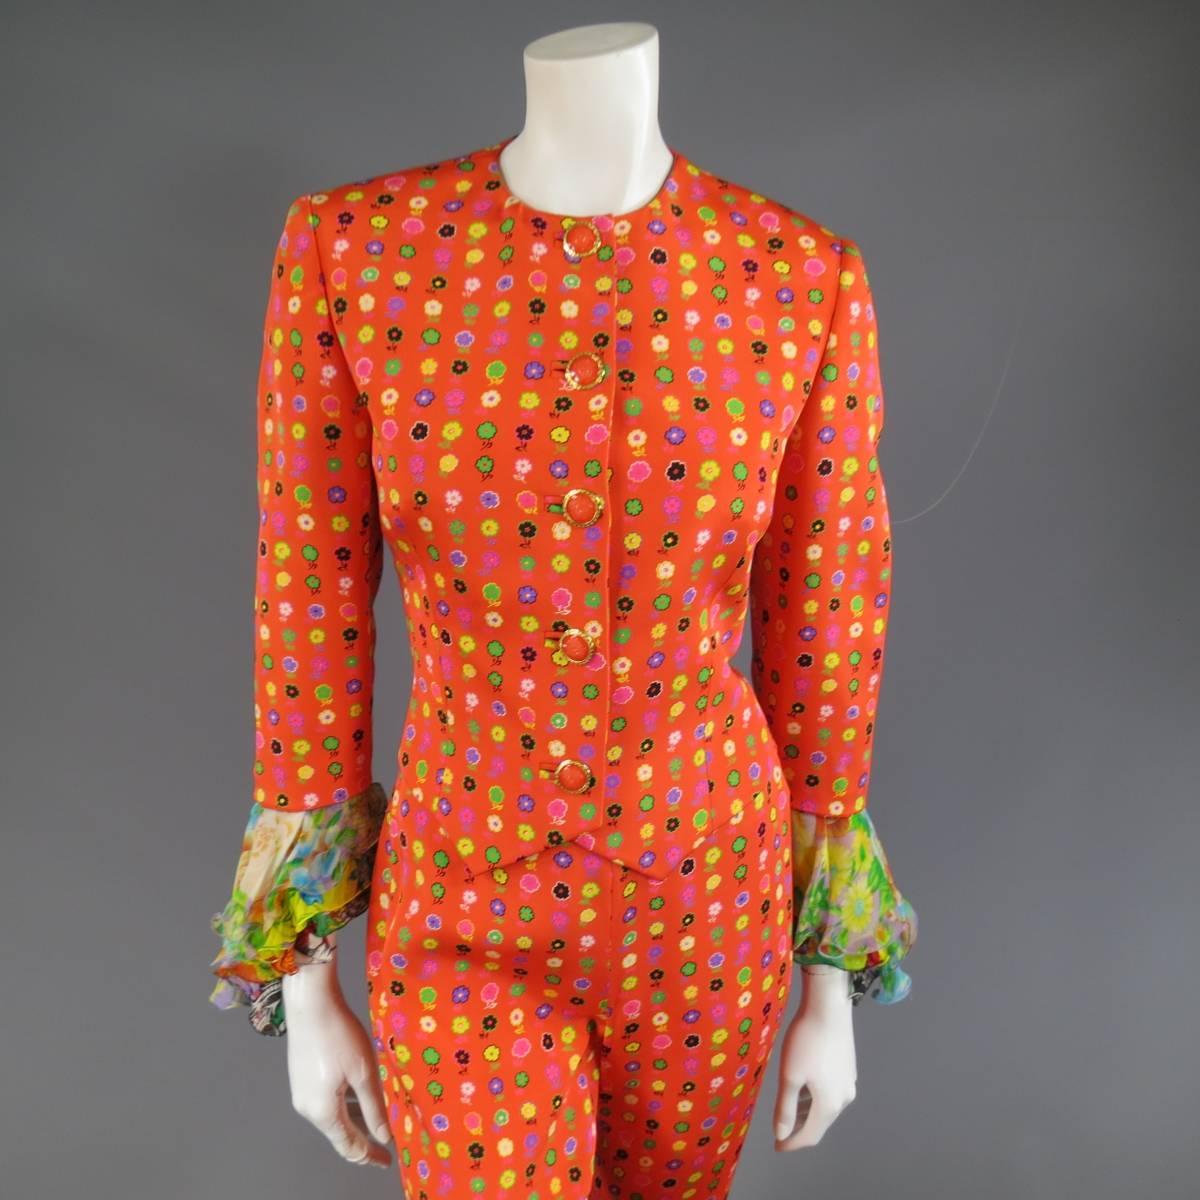 This fabulous GIANNI VERSACE COUTURE pants suit comes in a vibrant orange silk with an all over digital multi color floral print and features jacket with a round crew neckline, orange enamel Medusa buttons with gold tone metal frame, double point